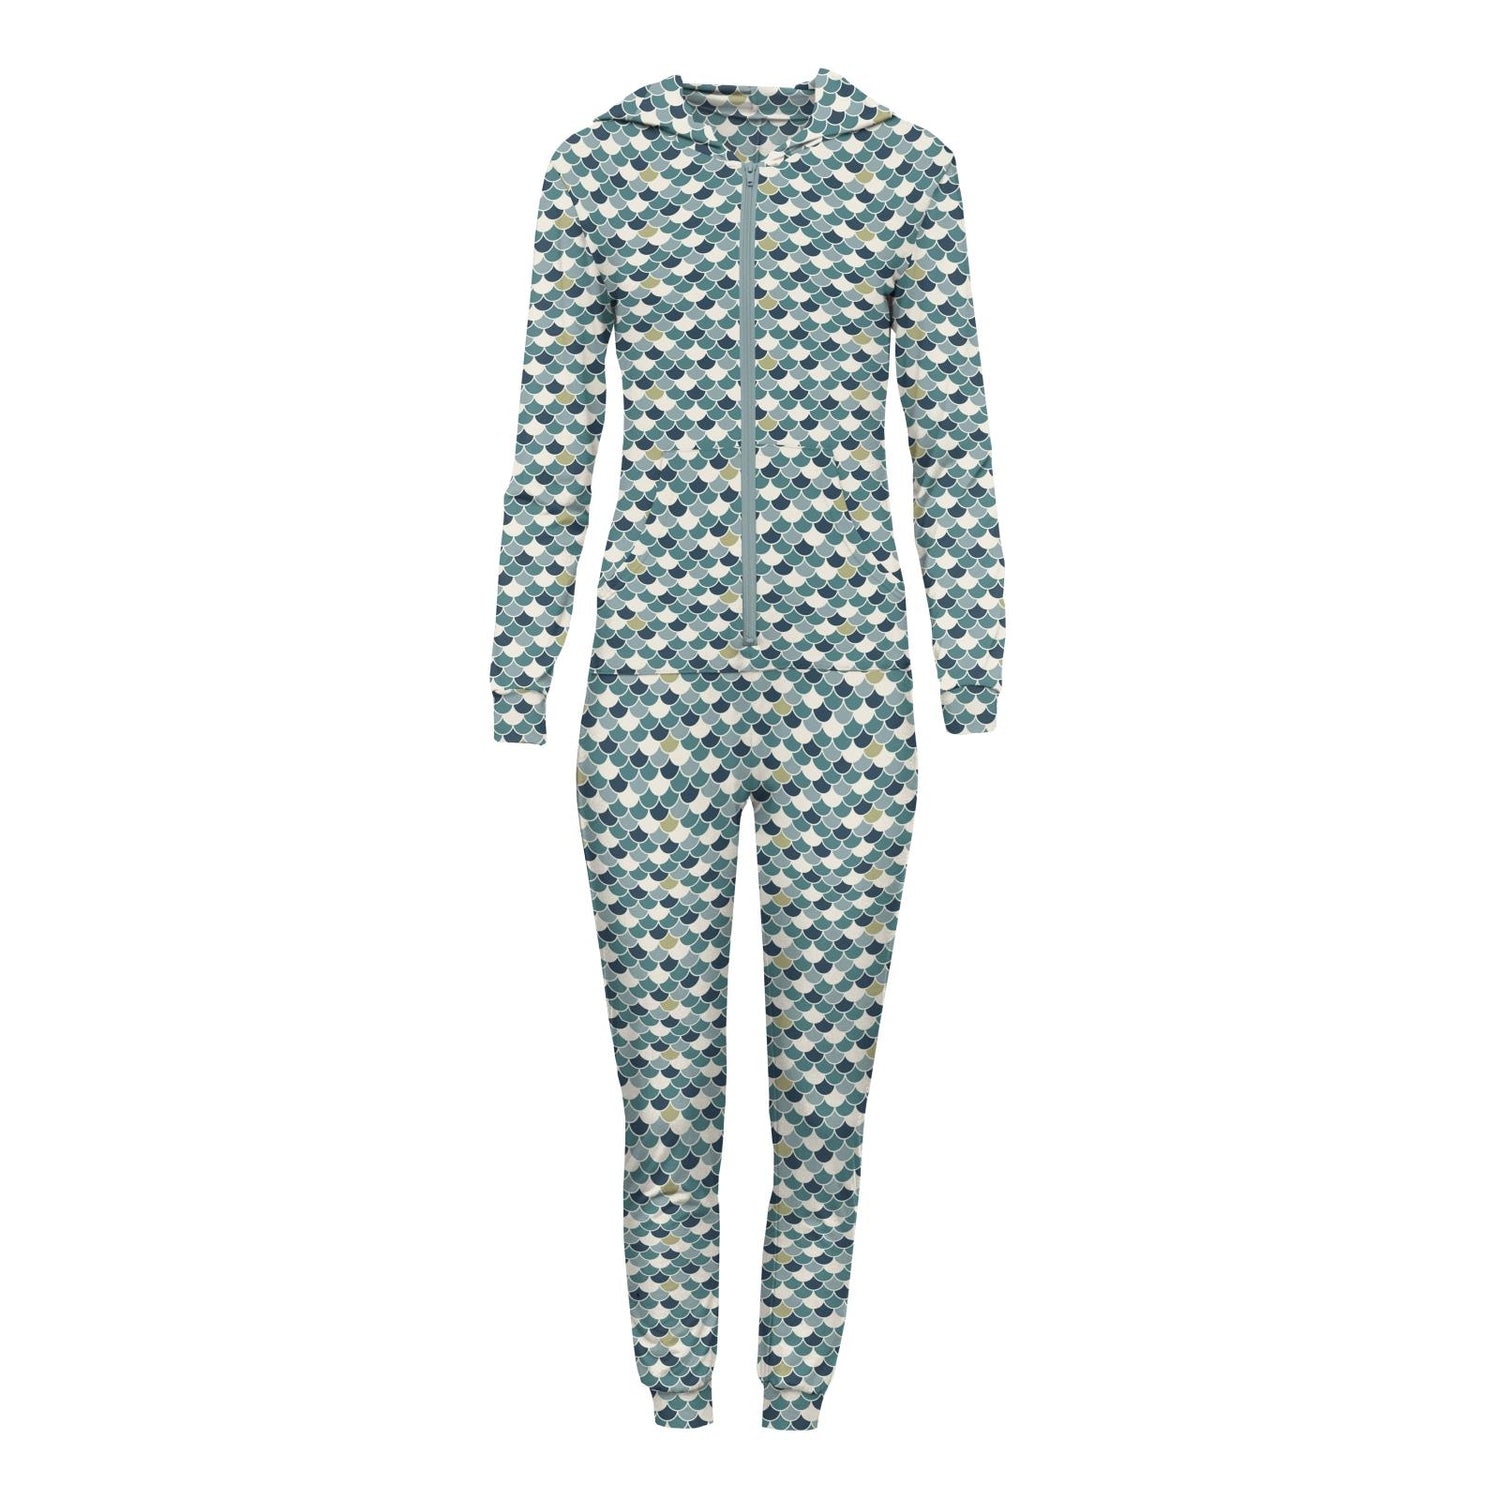 Women's Print Long Sleeve Jumpsuit with Hood in Lagoon Scales